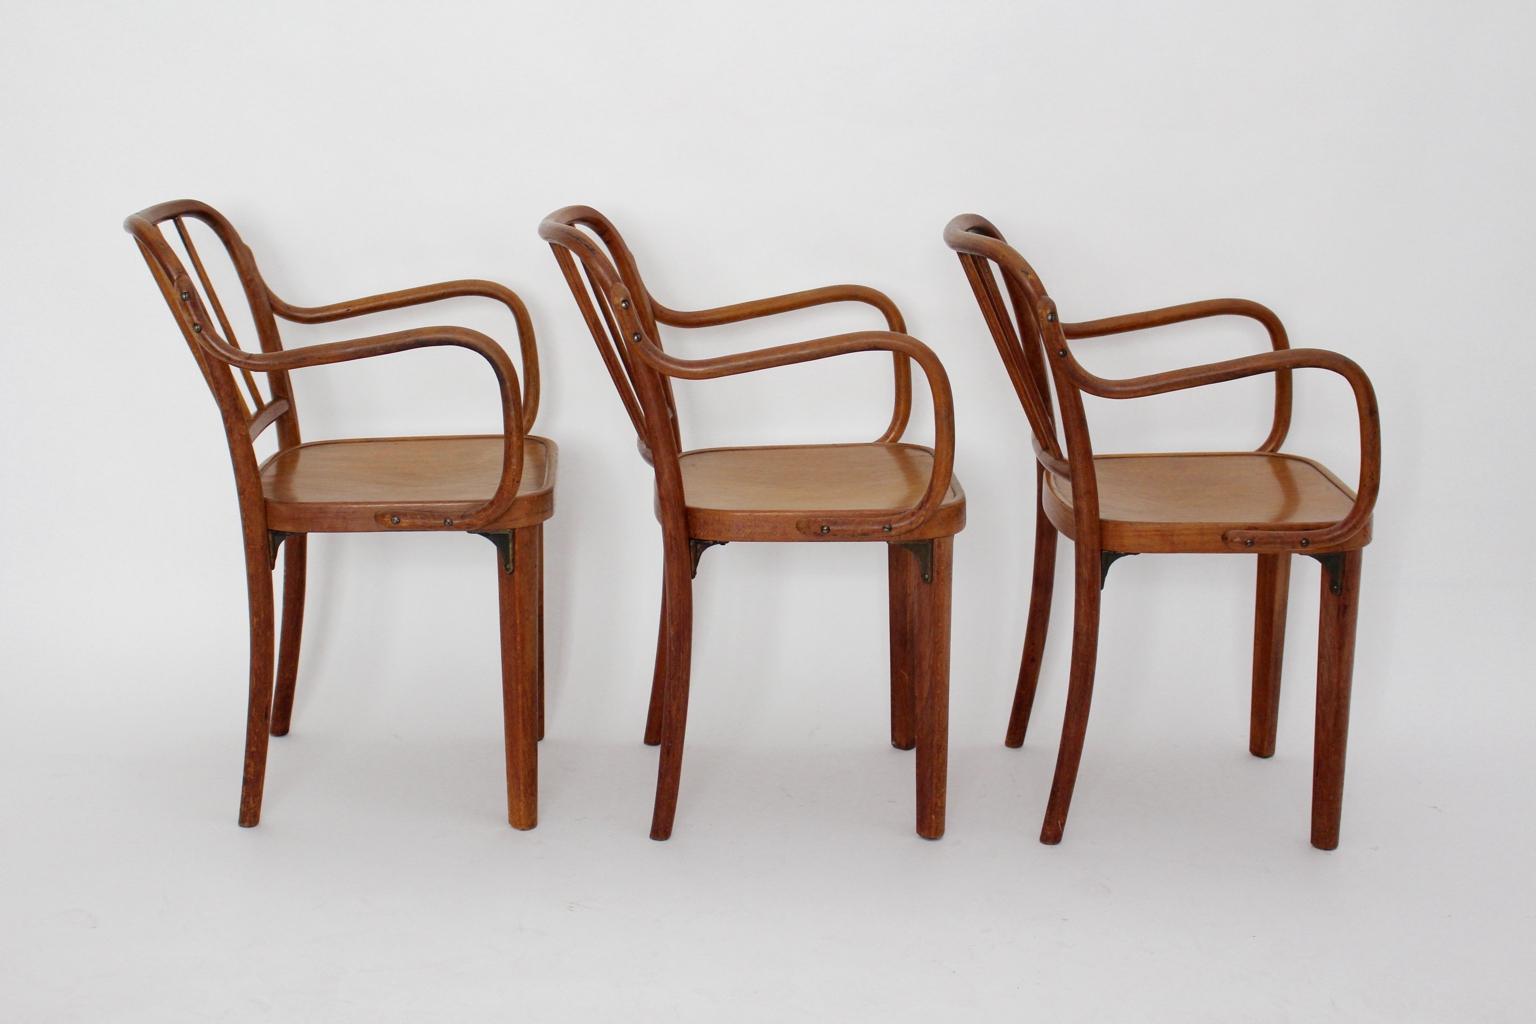 Cast Art Deco Era Vintage Armchairs attributed to Josef Frank Vienna, 1930s For Sale